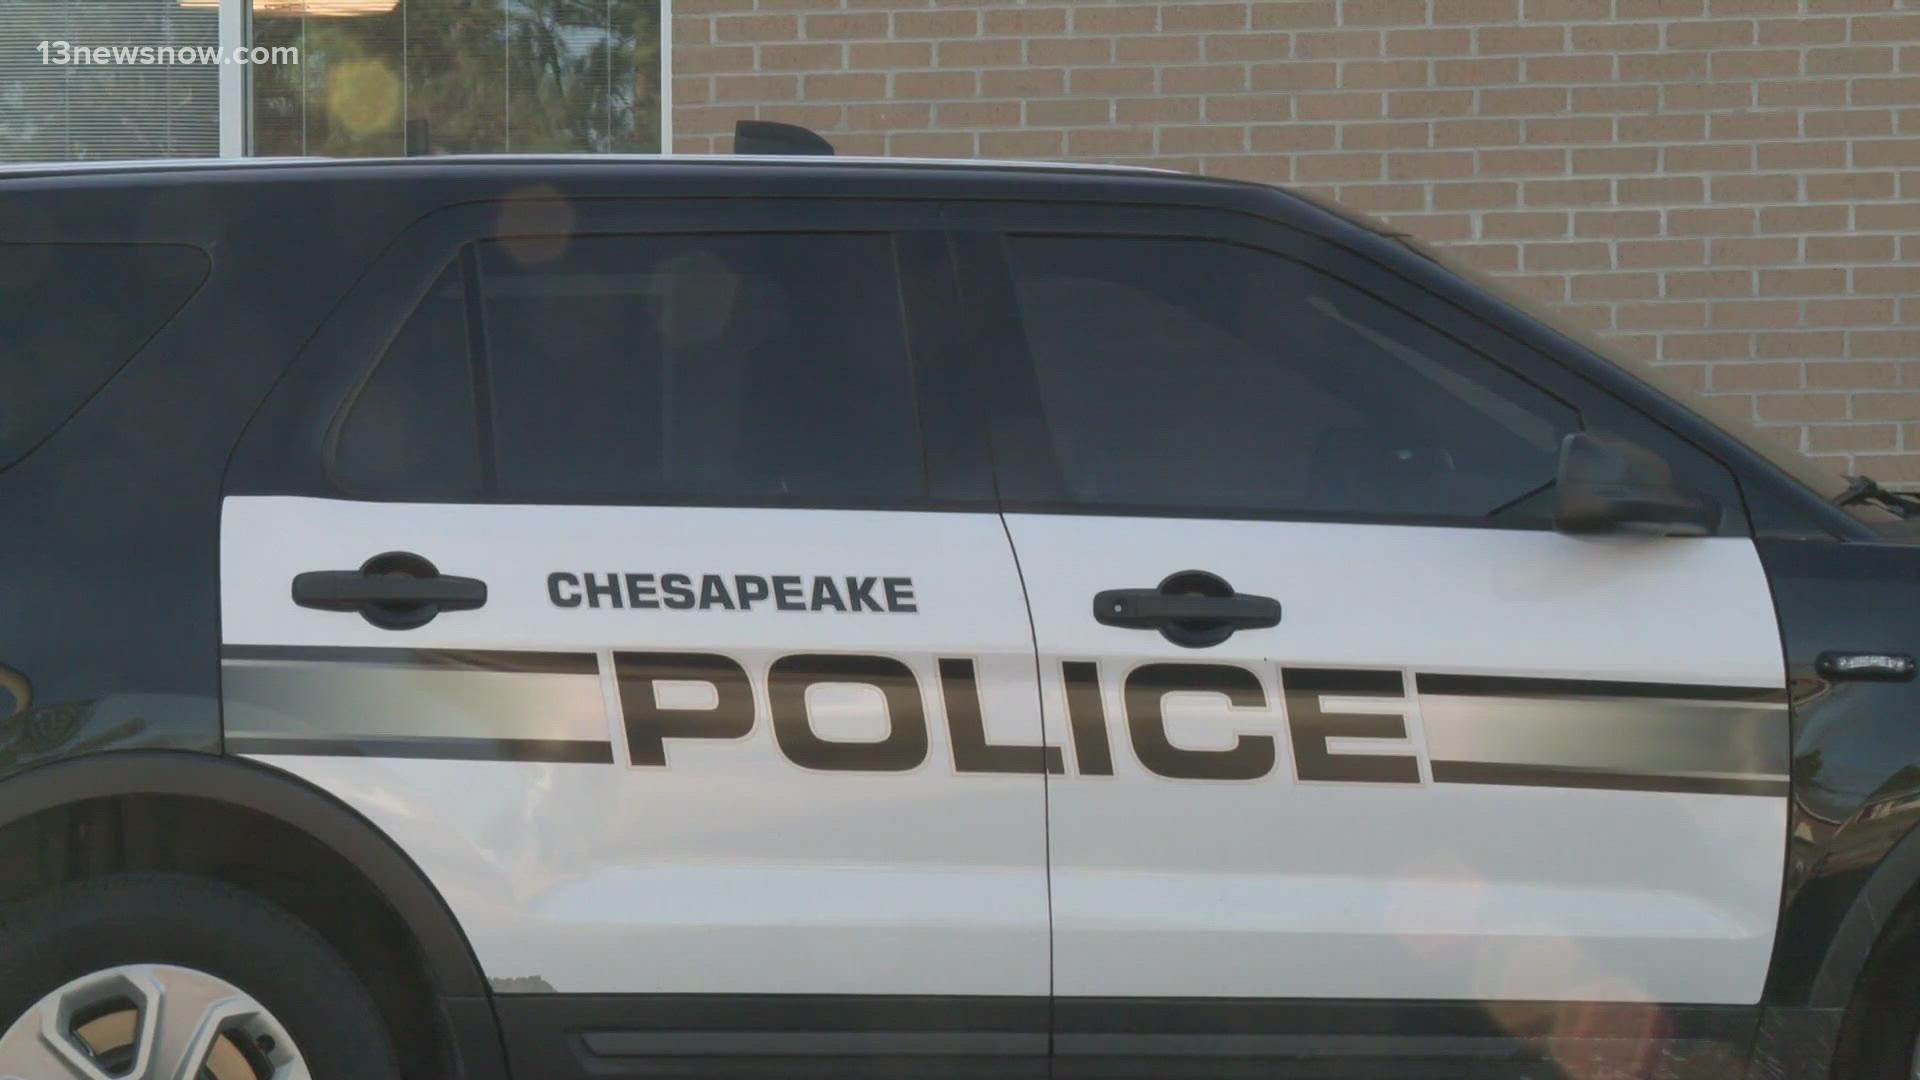 A person who lives in the area told 13NewsNow he is concerned about a shooting happening near his Chesapeake home and to learn a 17-year-old boy died.